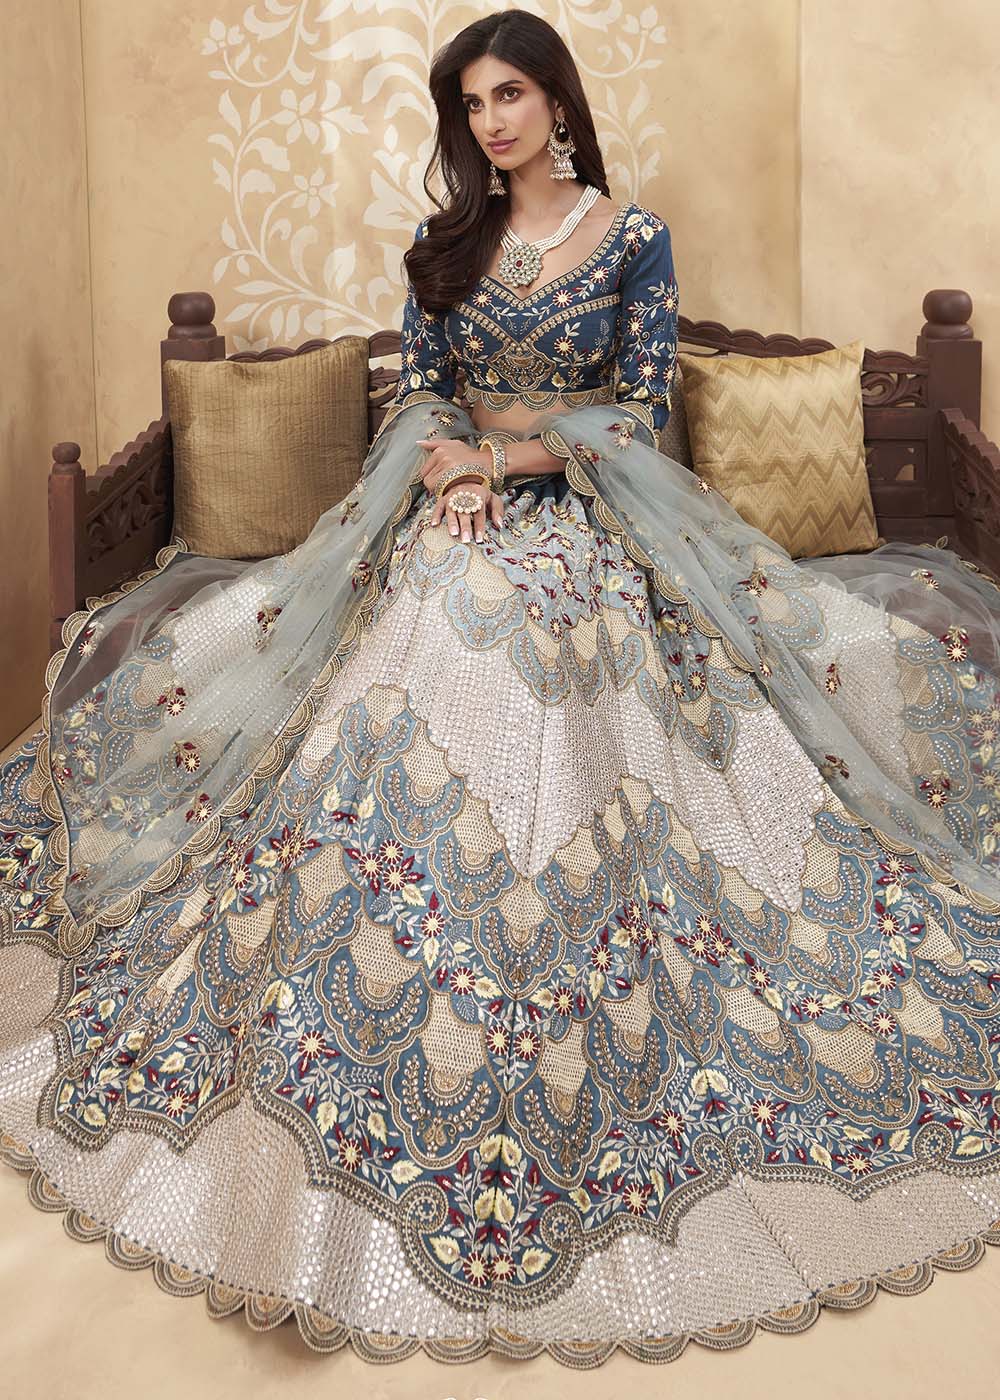 Fiord Blue and Grey Designer Net Lehenga with Multi Thread Embroidery Work